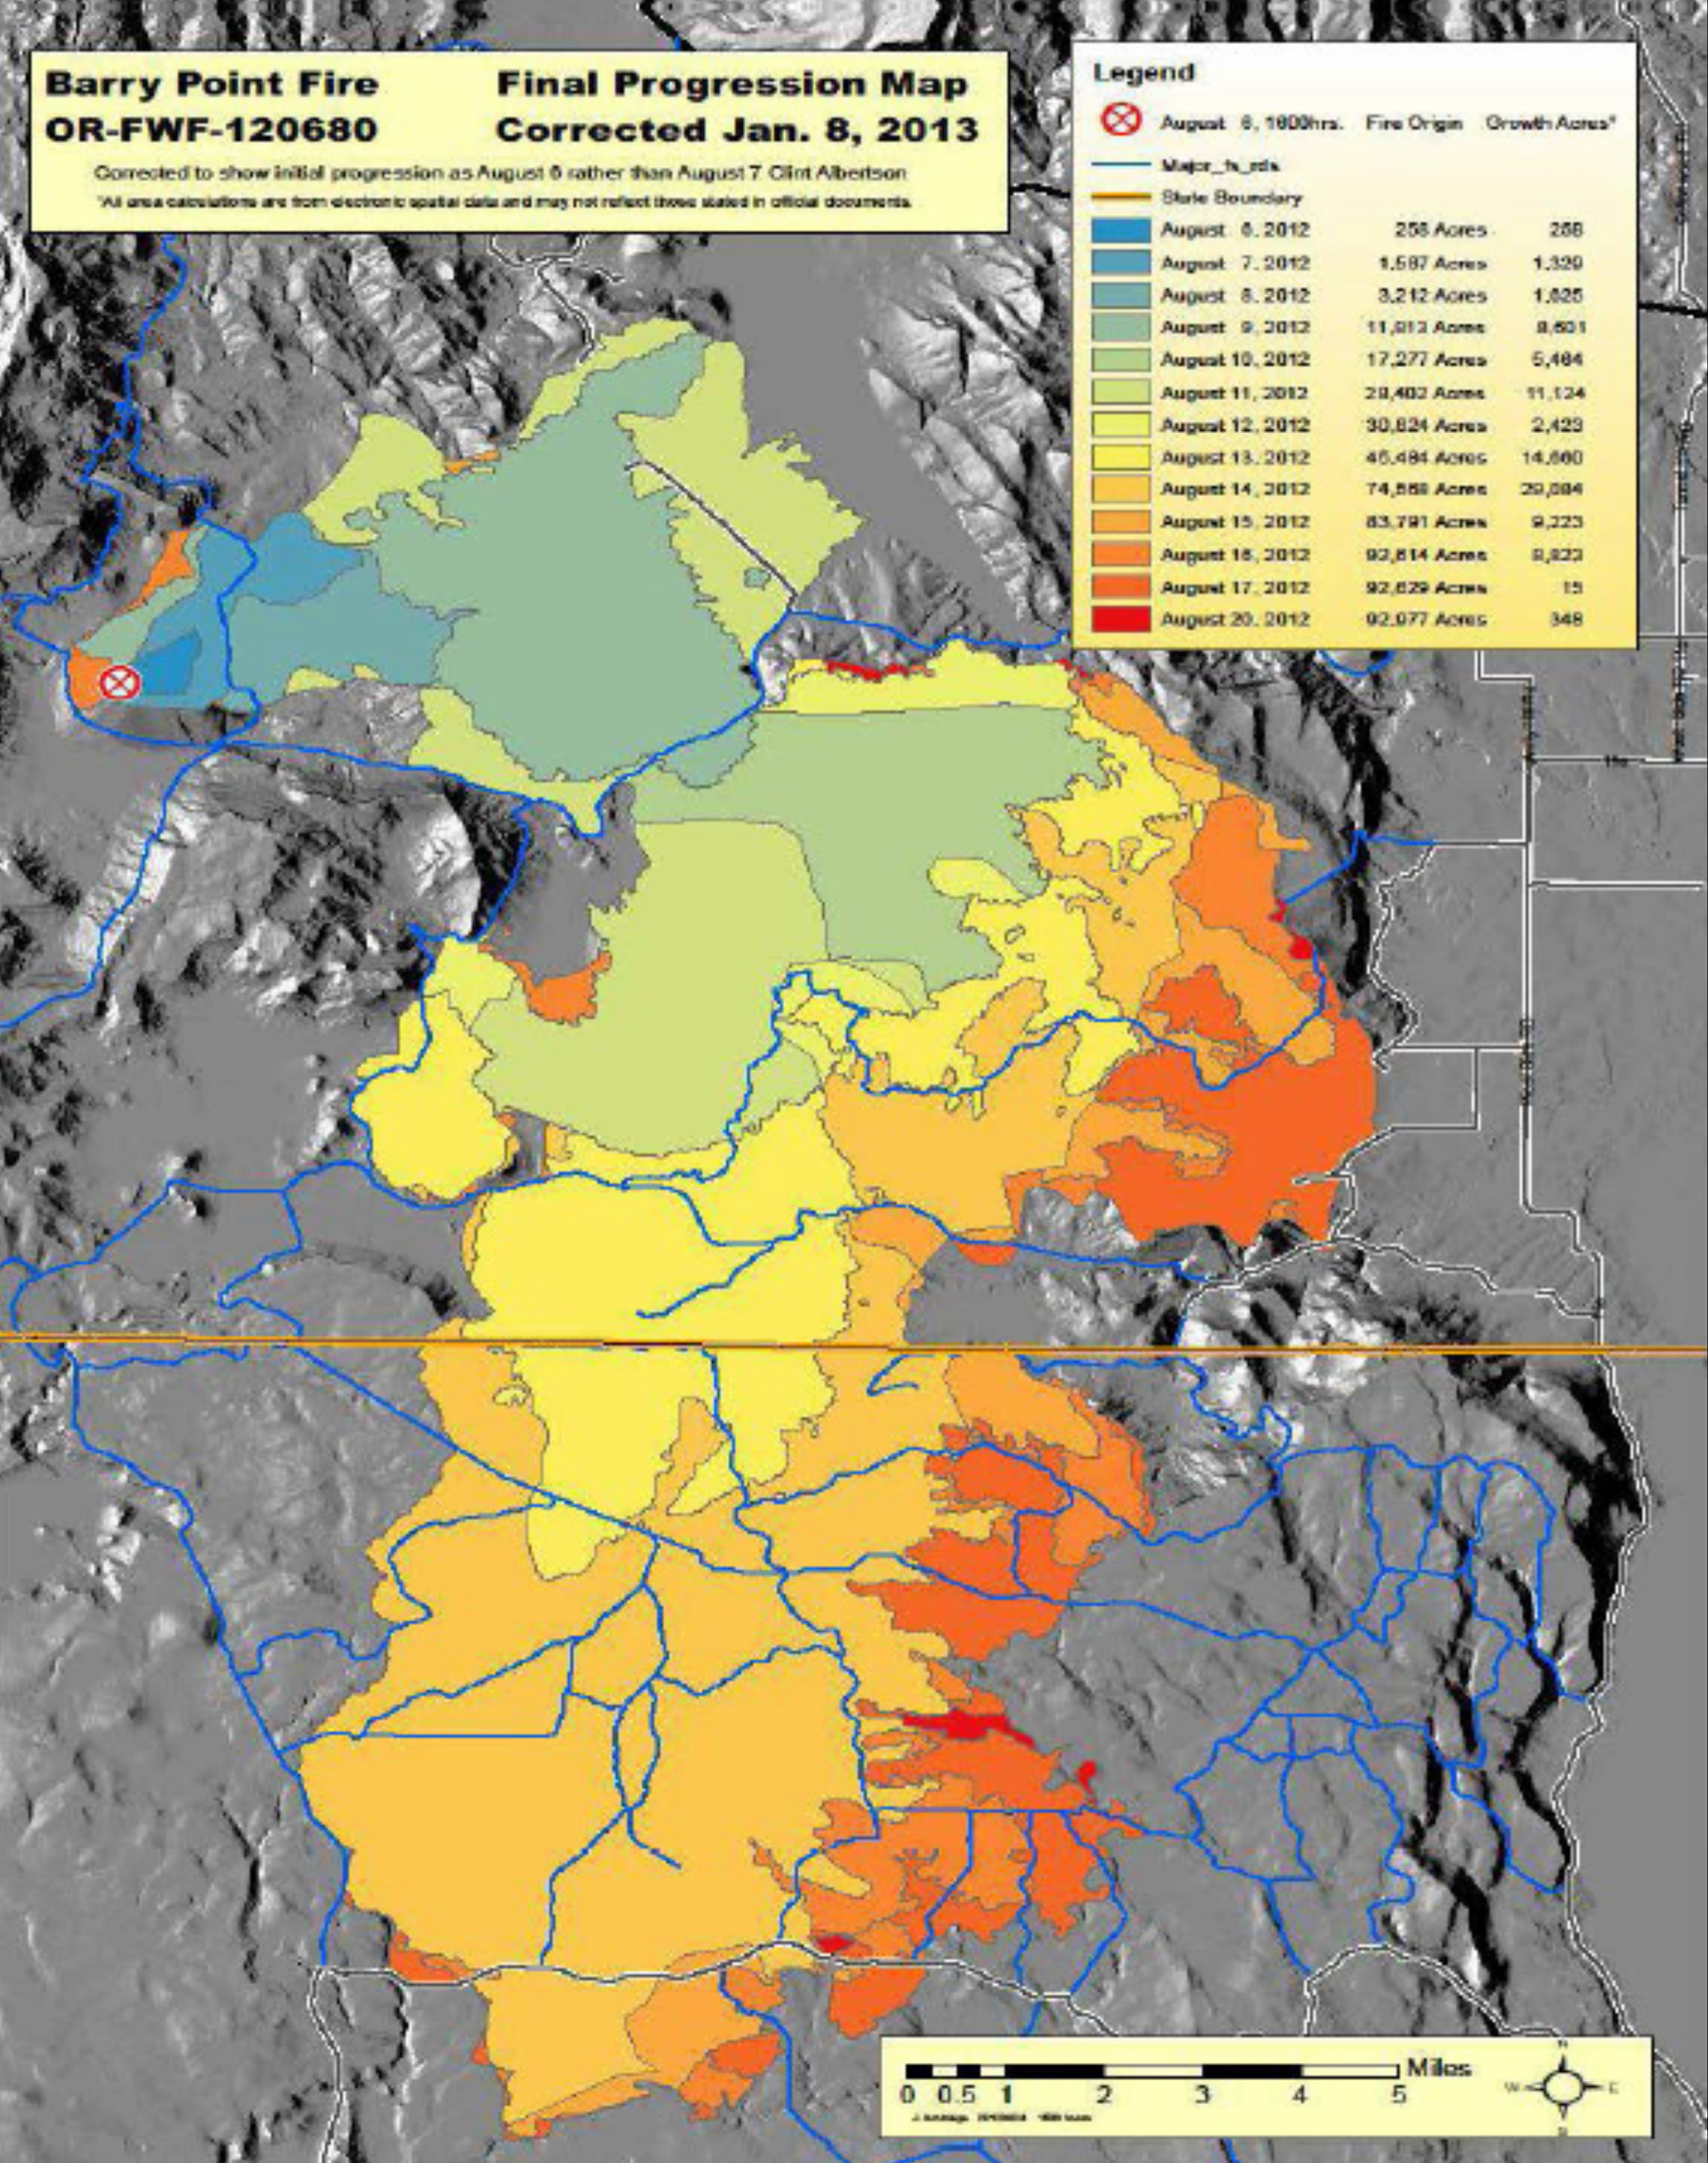 File:barry Point Fire Map, Oregon And California, 2012 - Oregon California Fire Map